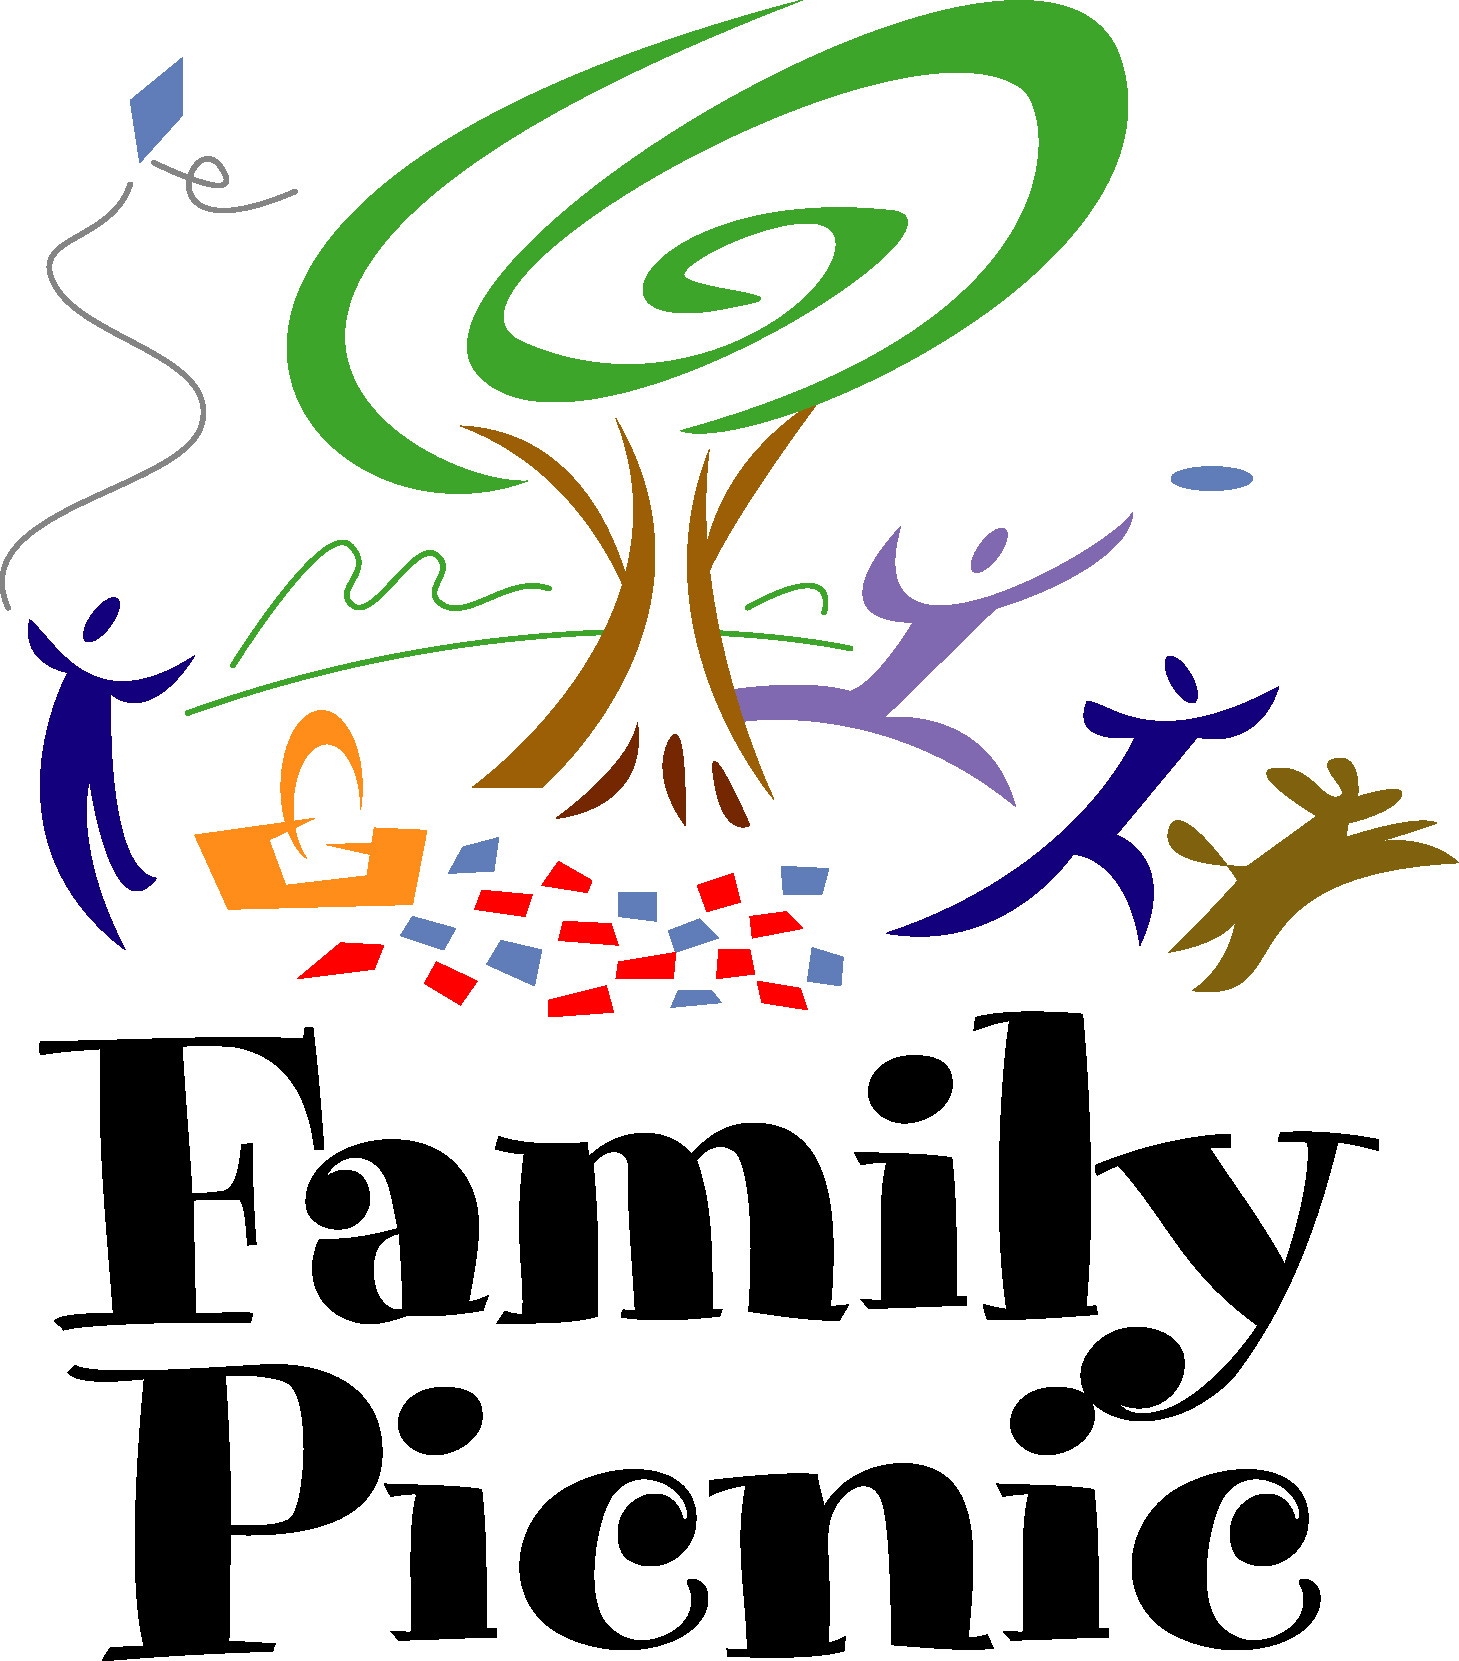 Picnic Border Clipart | Clipart library - Free Clipart Images